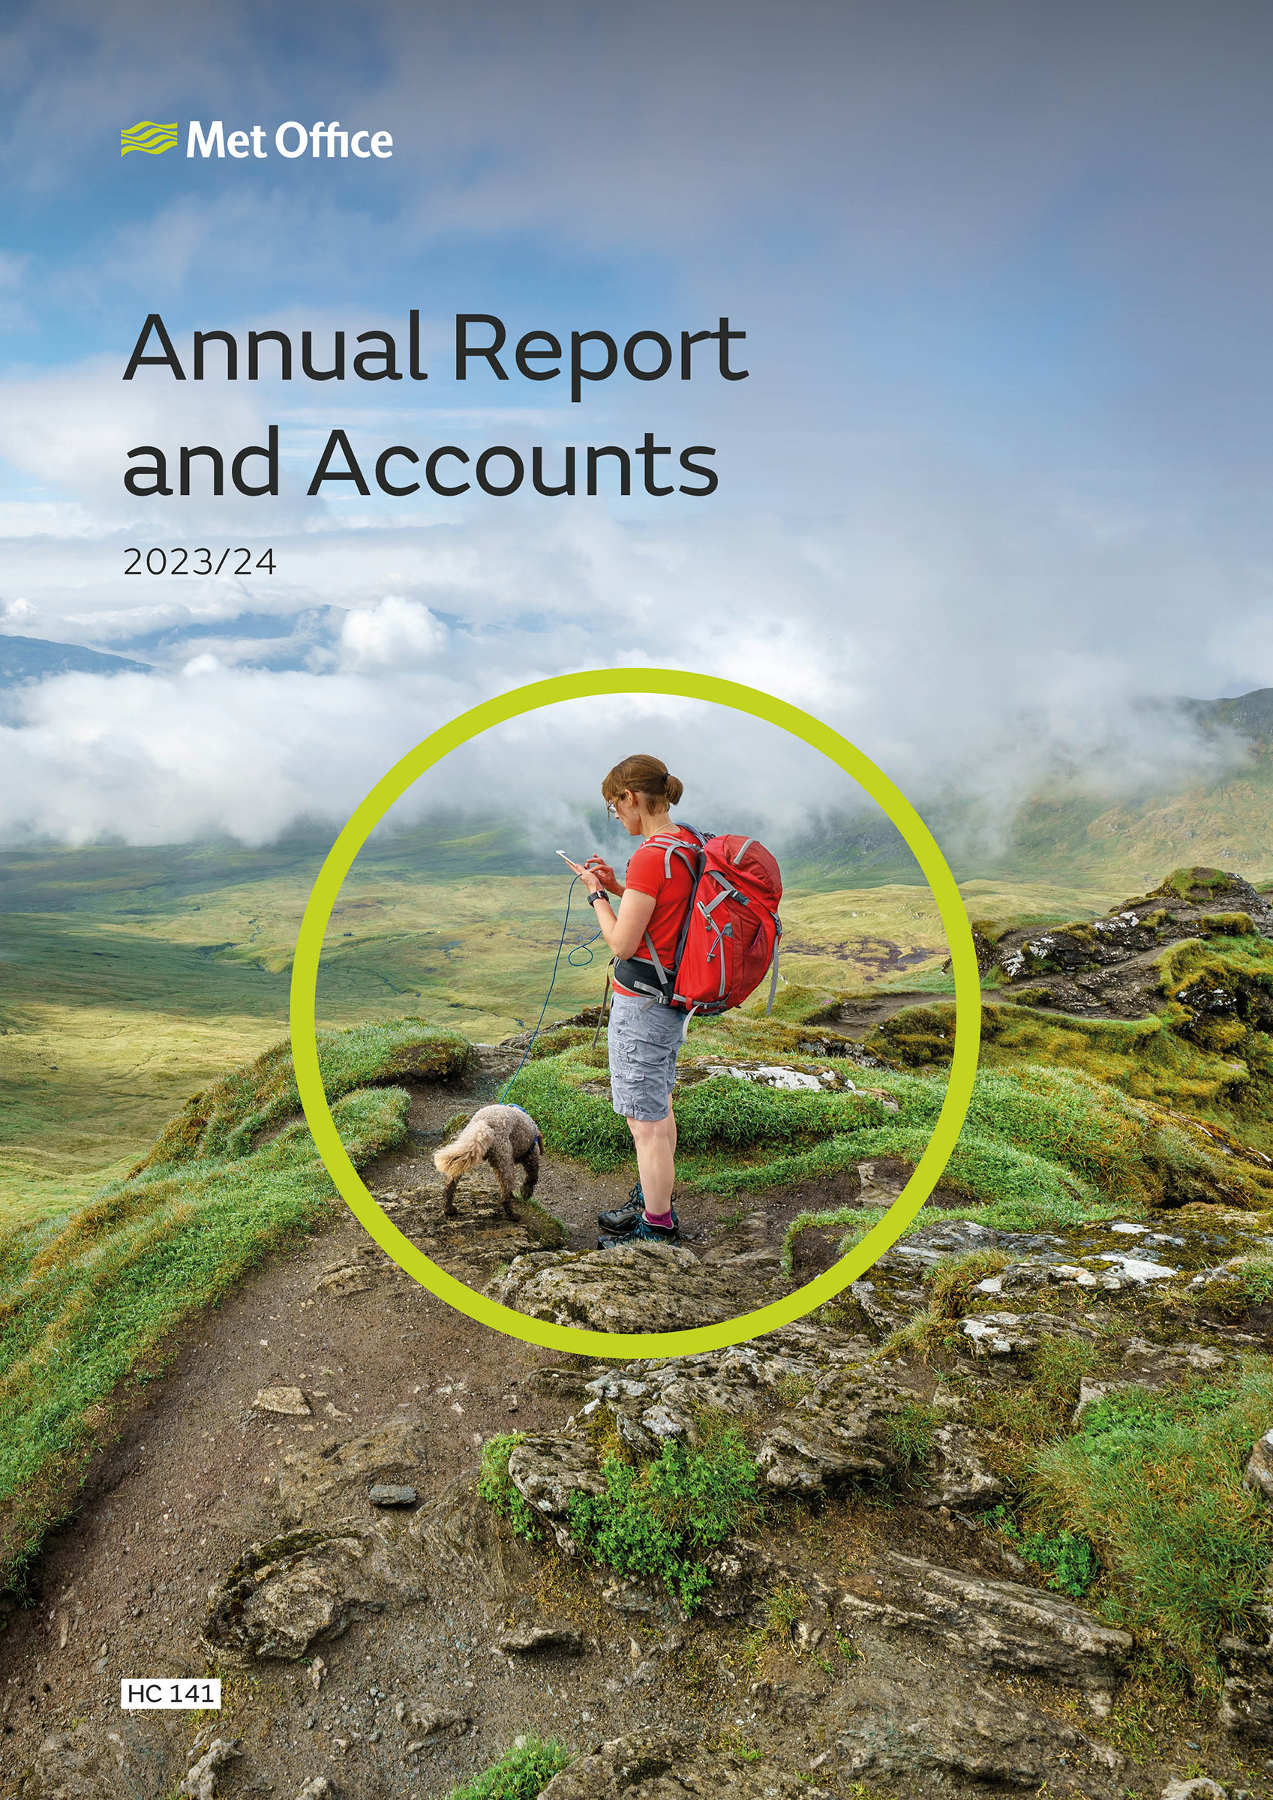 Met Office Annual Report and Accounts 2024 - A walker in the countryside with blue skies